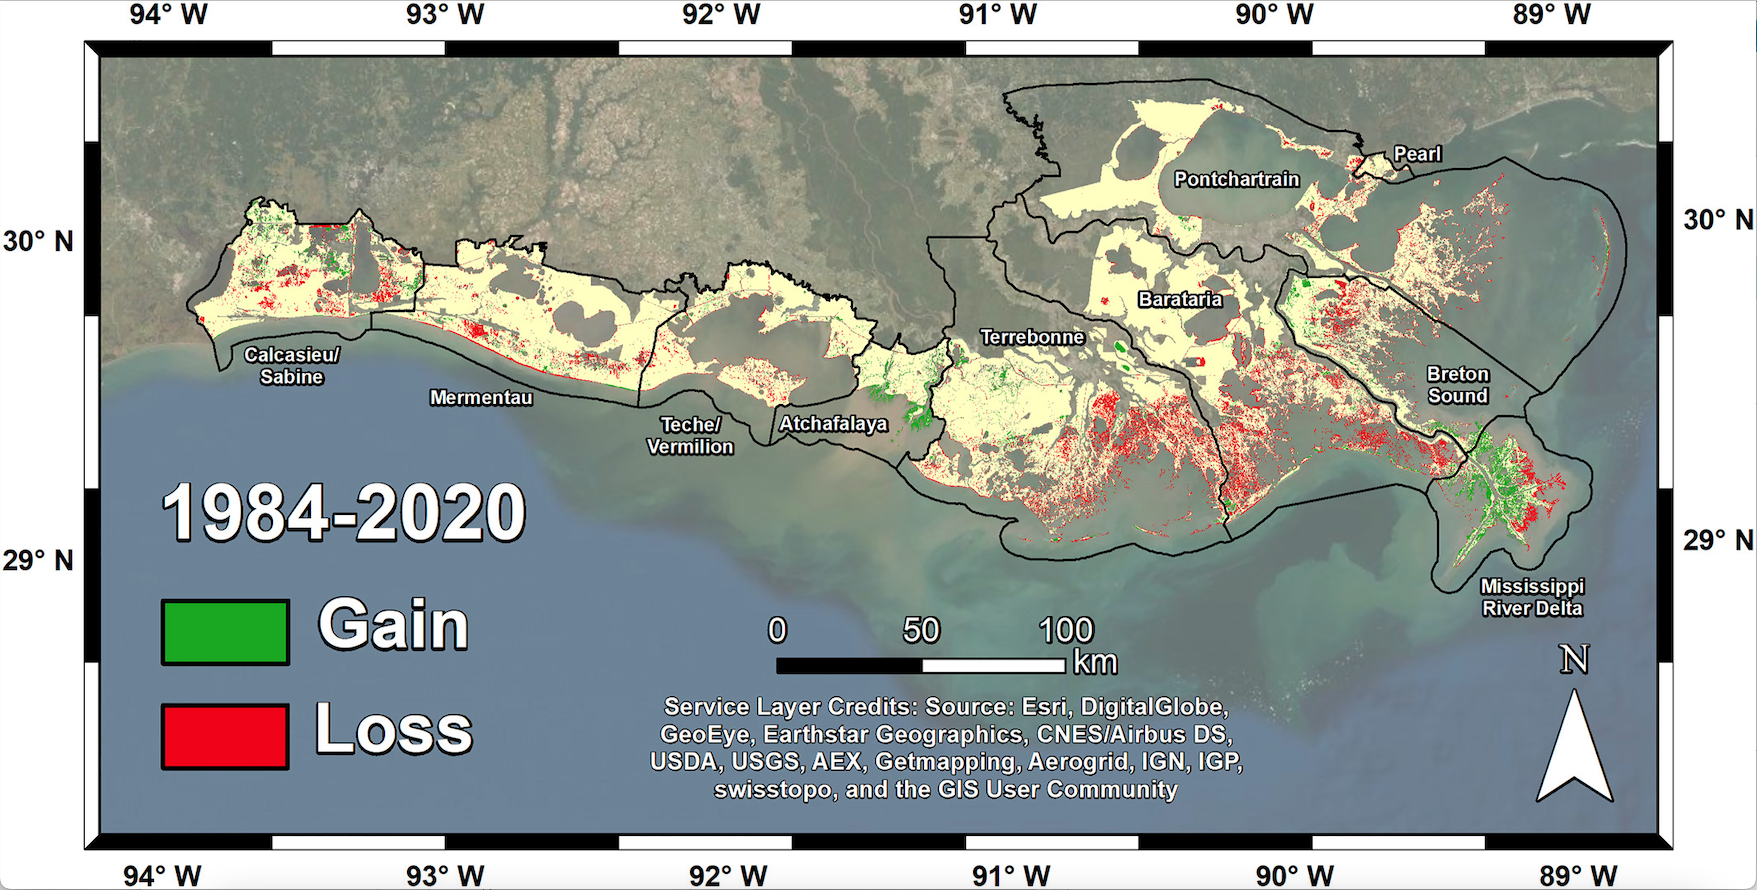 A visual of the Louisiana coastline, showing the gain, in green, or loss, in red, of wetland soil.